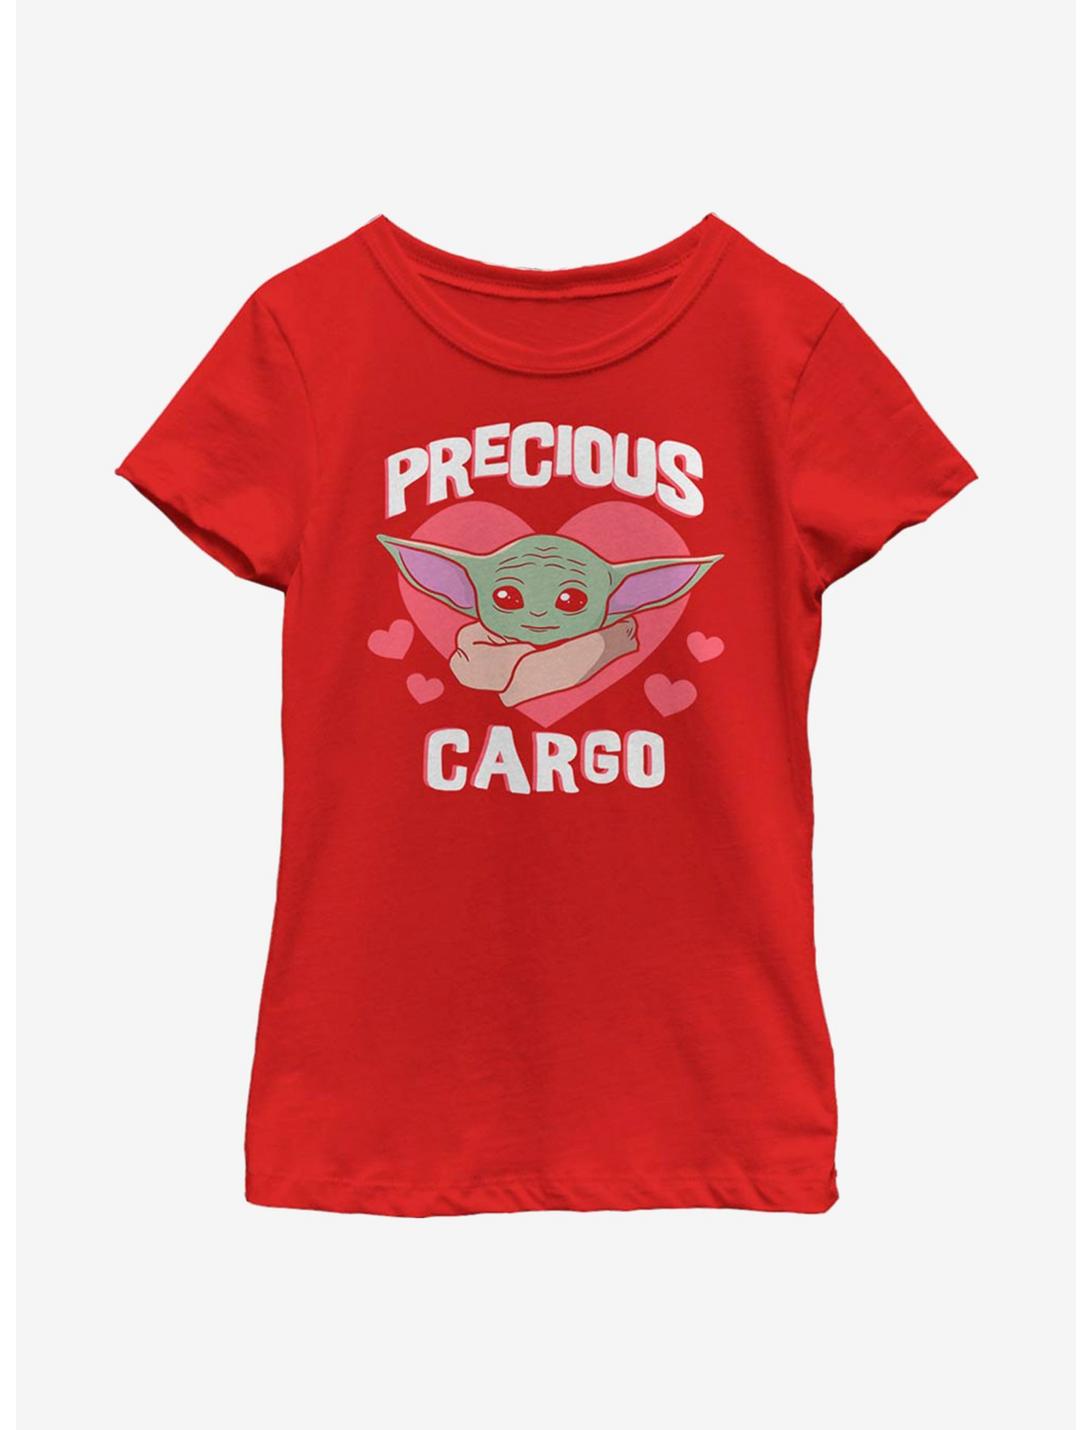 Star Wars The Mandalorian Precious Cargo The Child Youth Girls T-Shirt, RED, hi-res